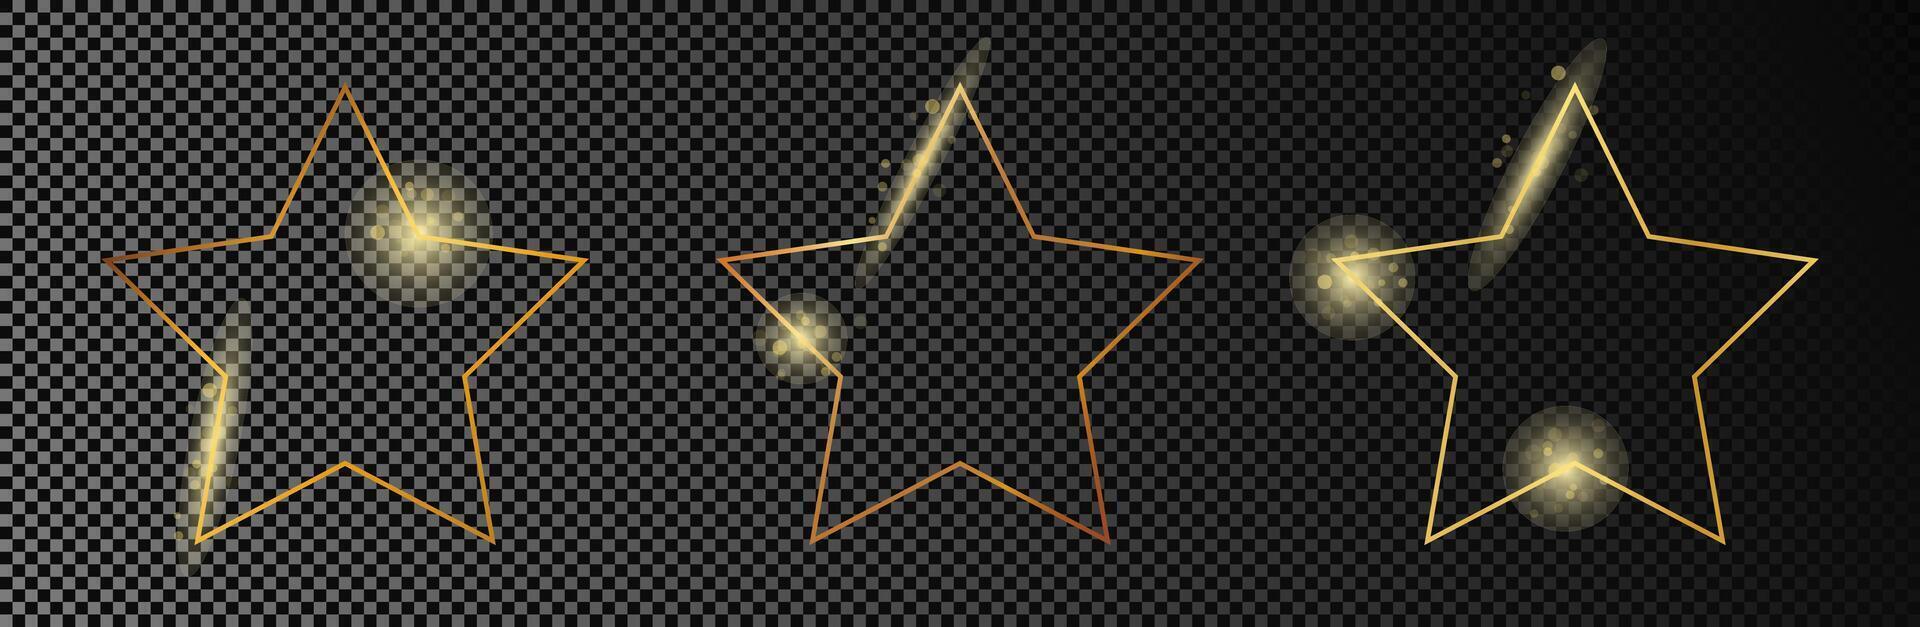 Gold glowing star shape frame vector